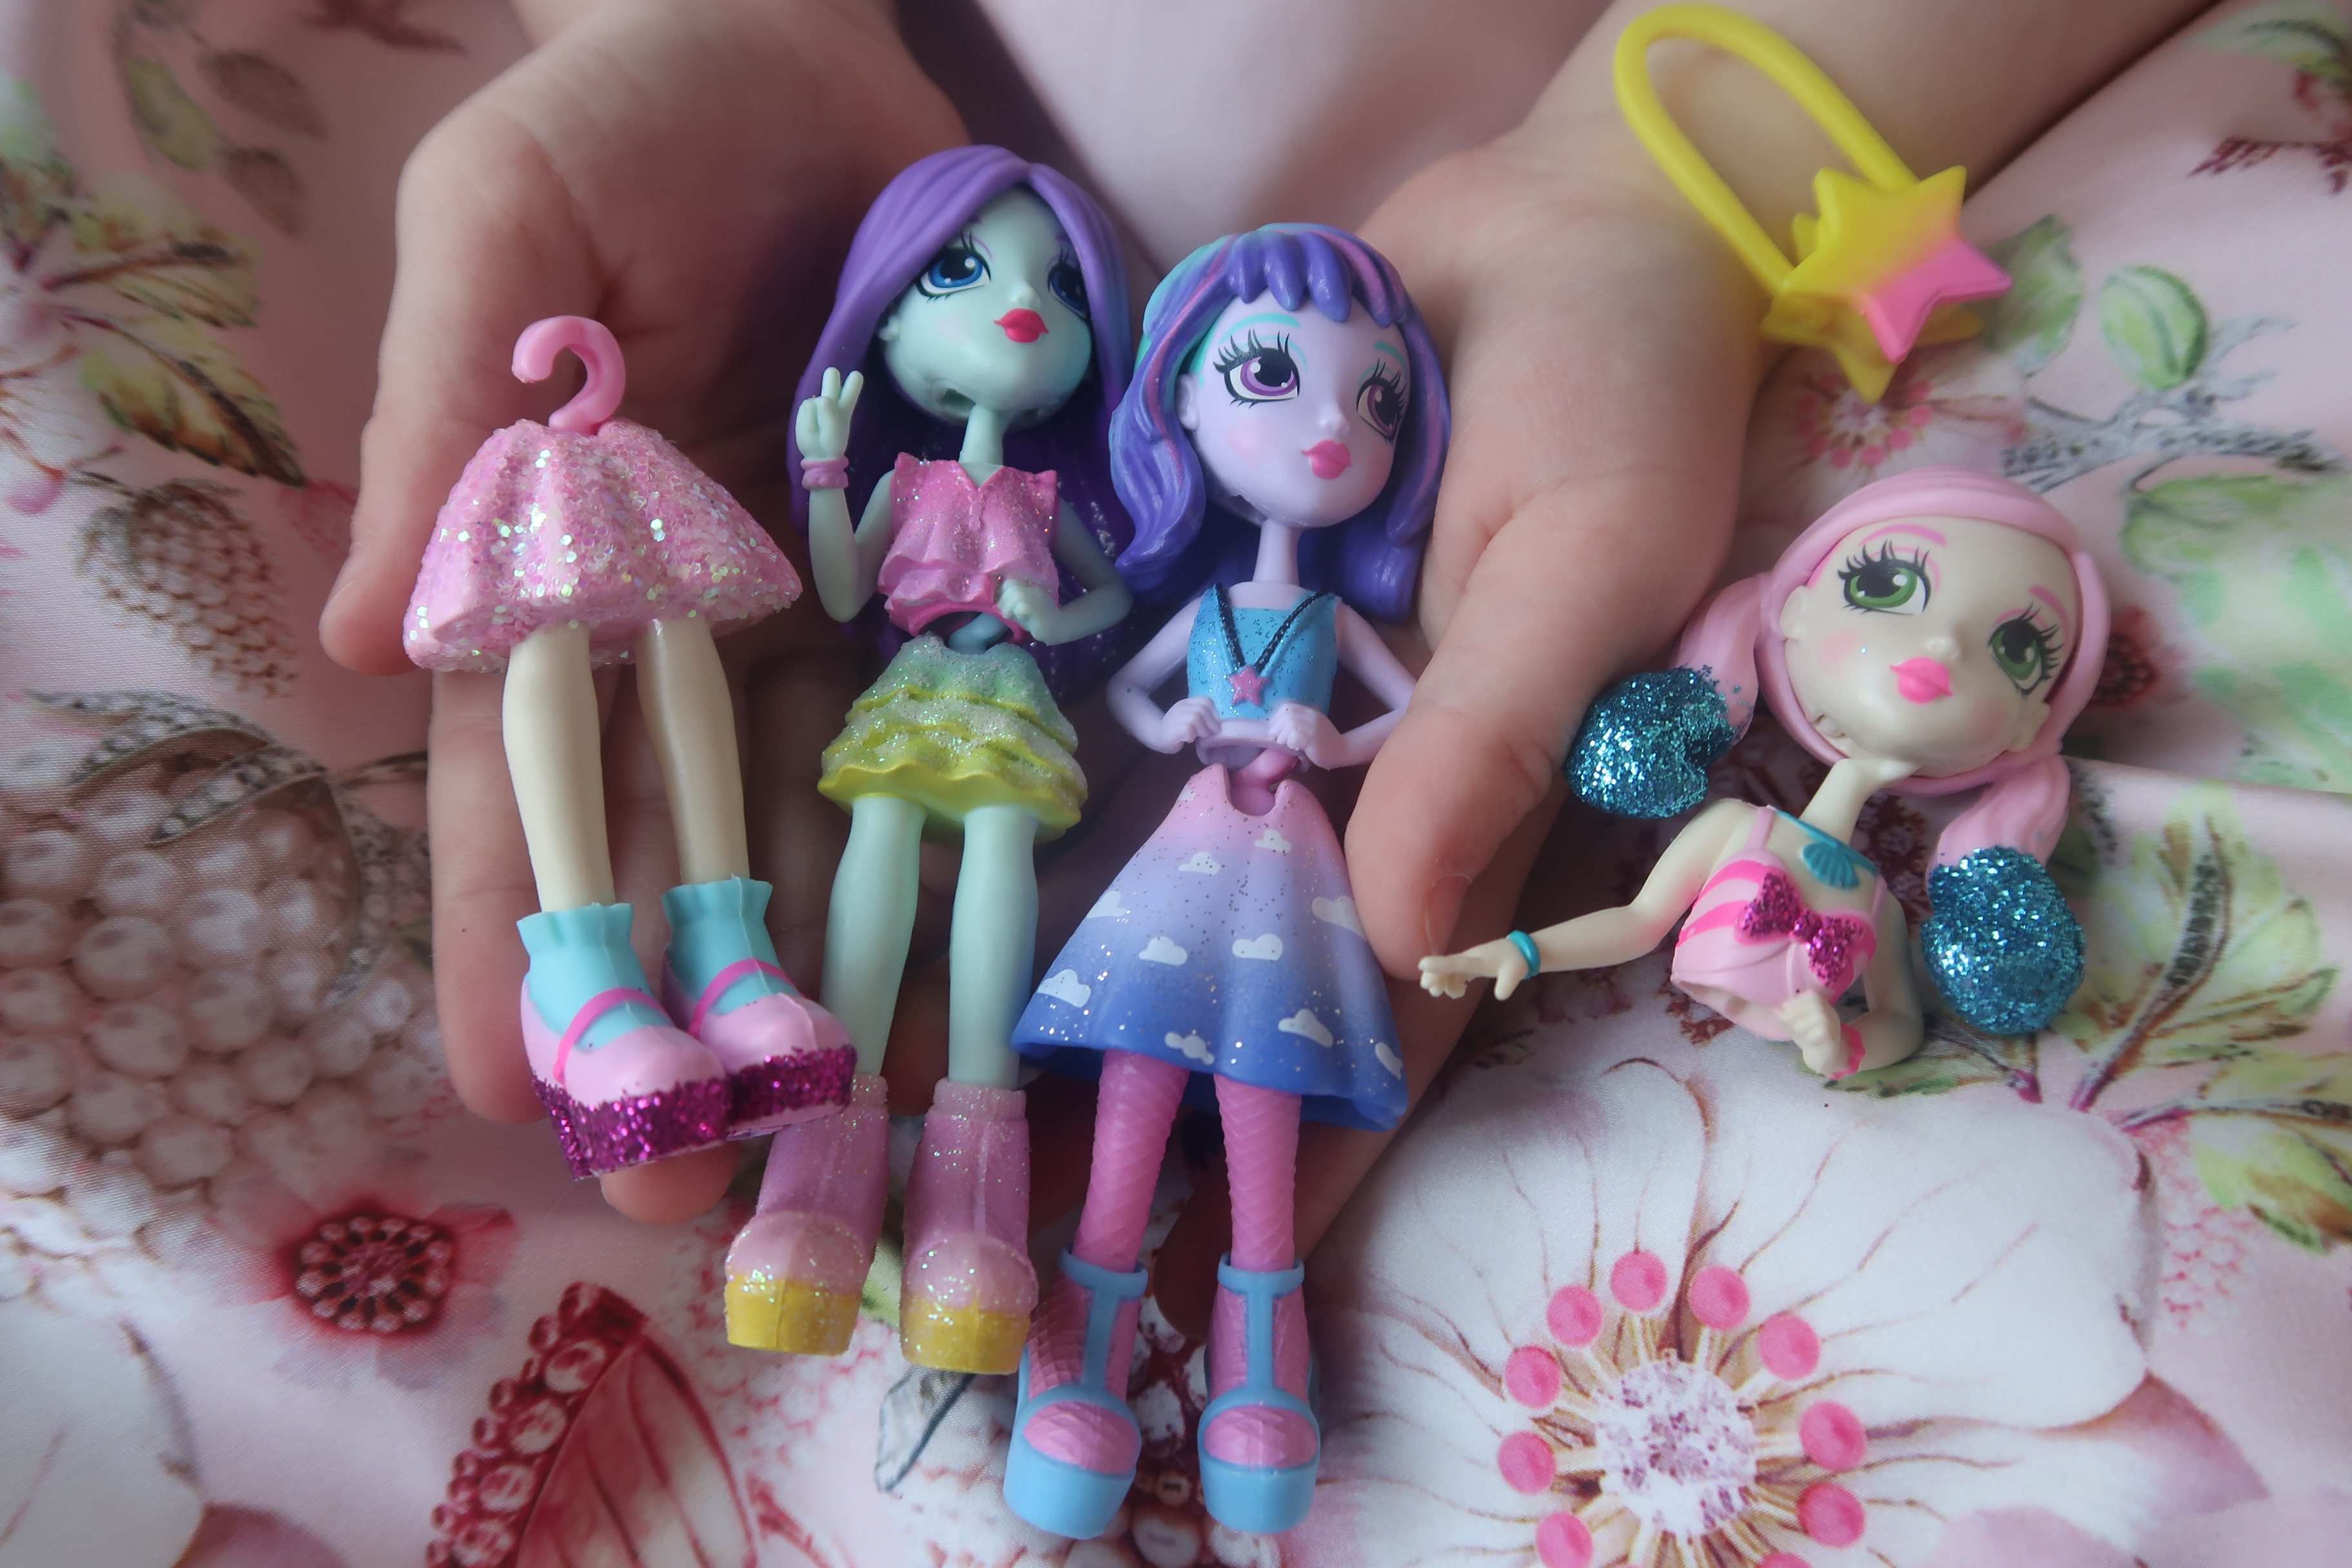 REVIEW - Off the Hook Dolls - Collectible Fashionista Dolls - Real